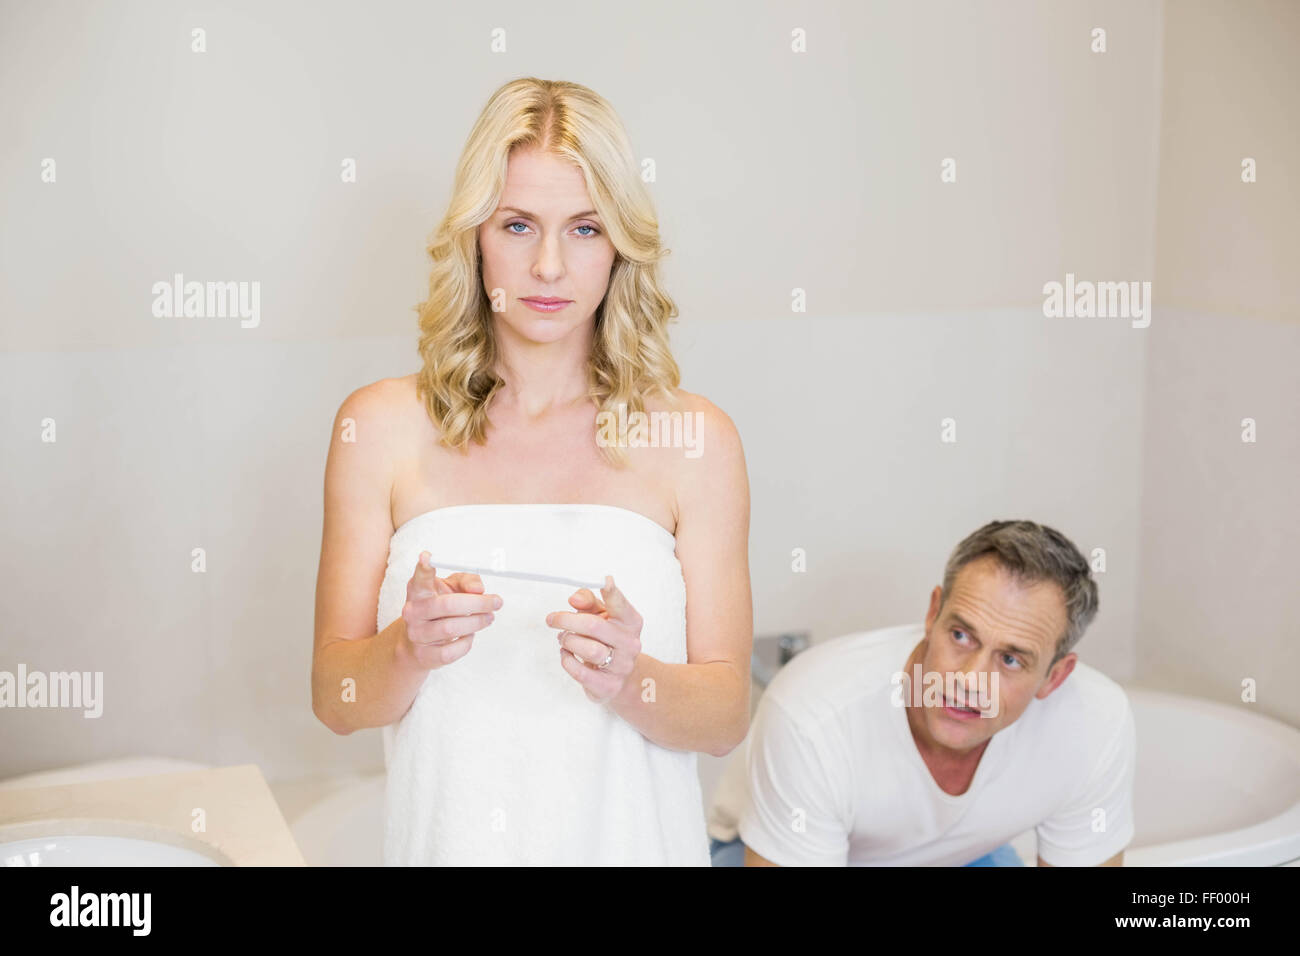 Couple waiting for a pregnancy test results Stock Photo